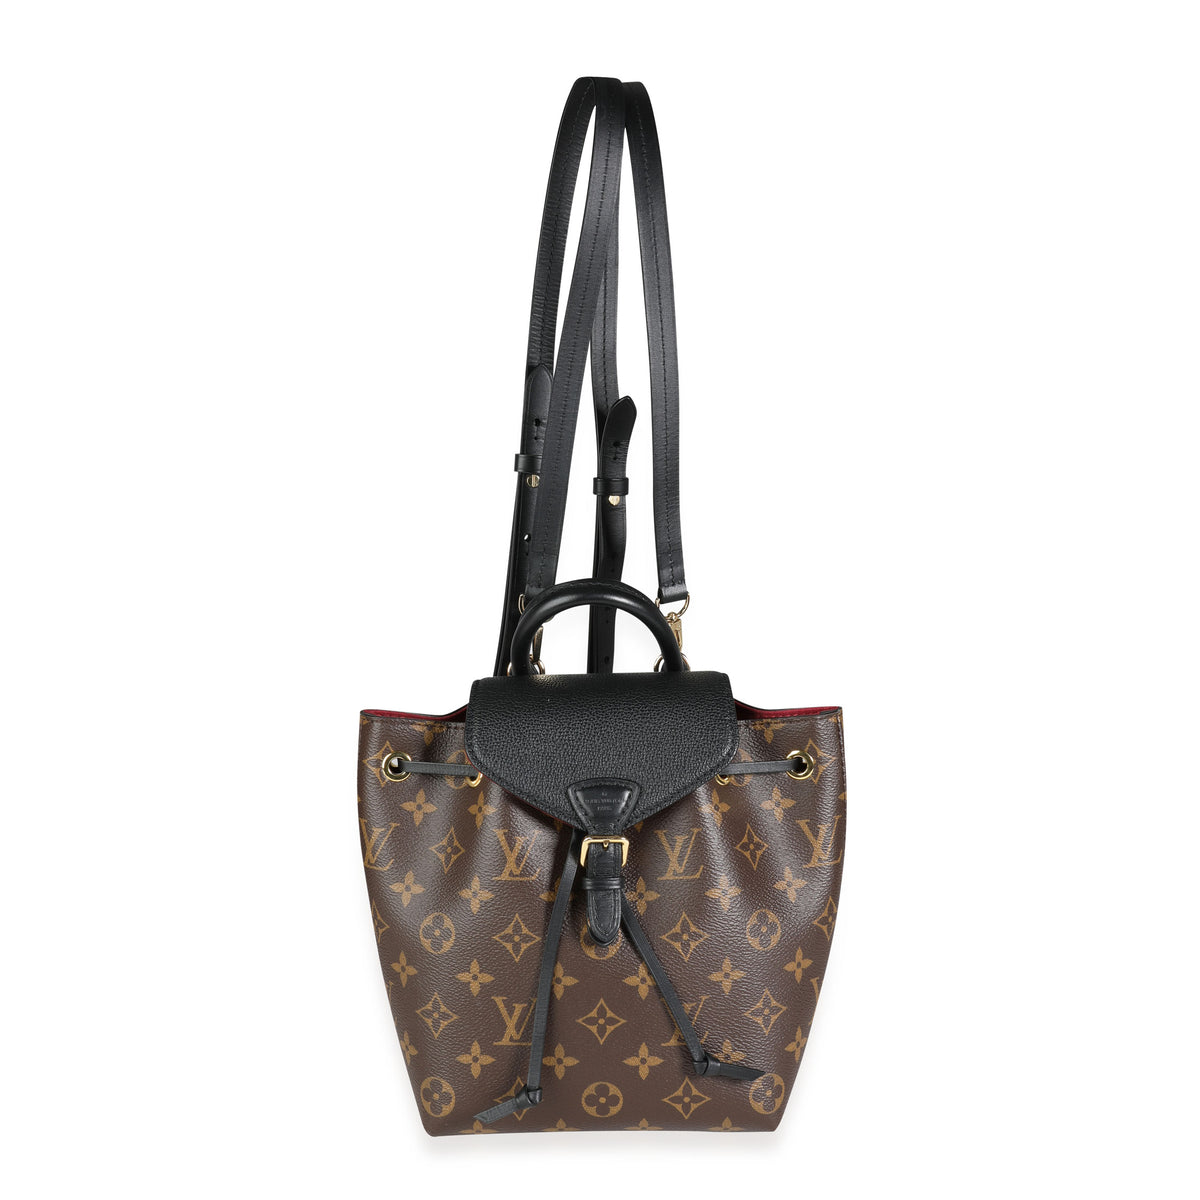 LOUIS VUITTON MONTSOURIS BB UPDATED REVIEW! 1.5 YEARS + WEAR AND